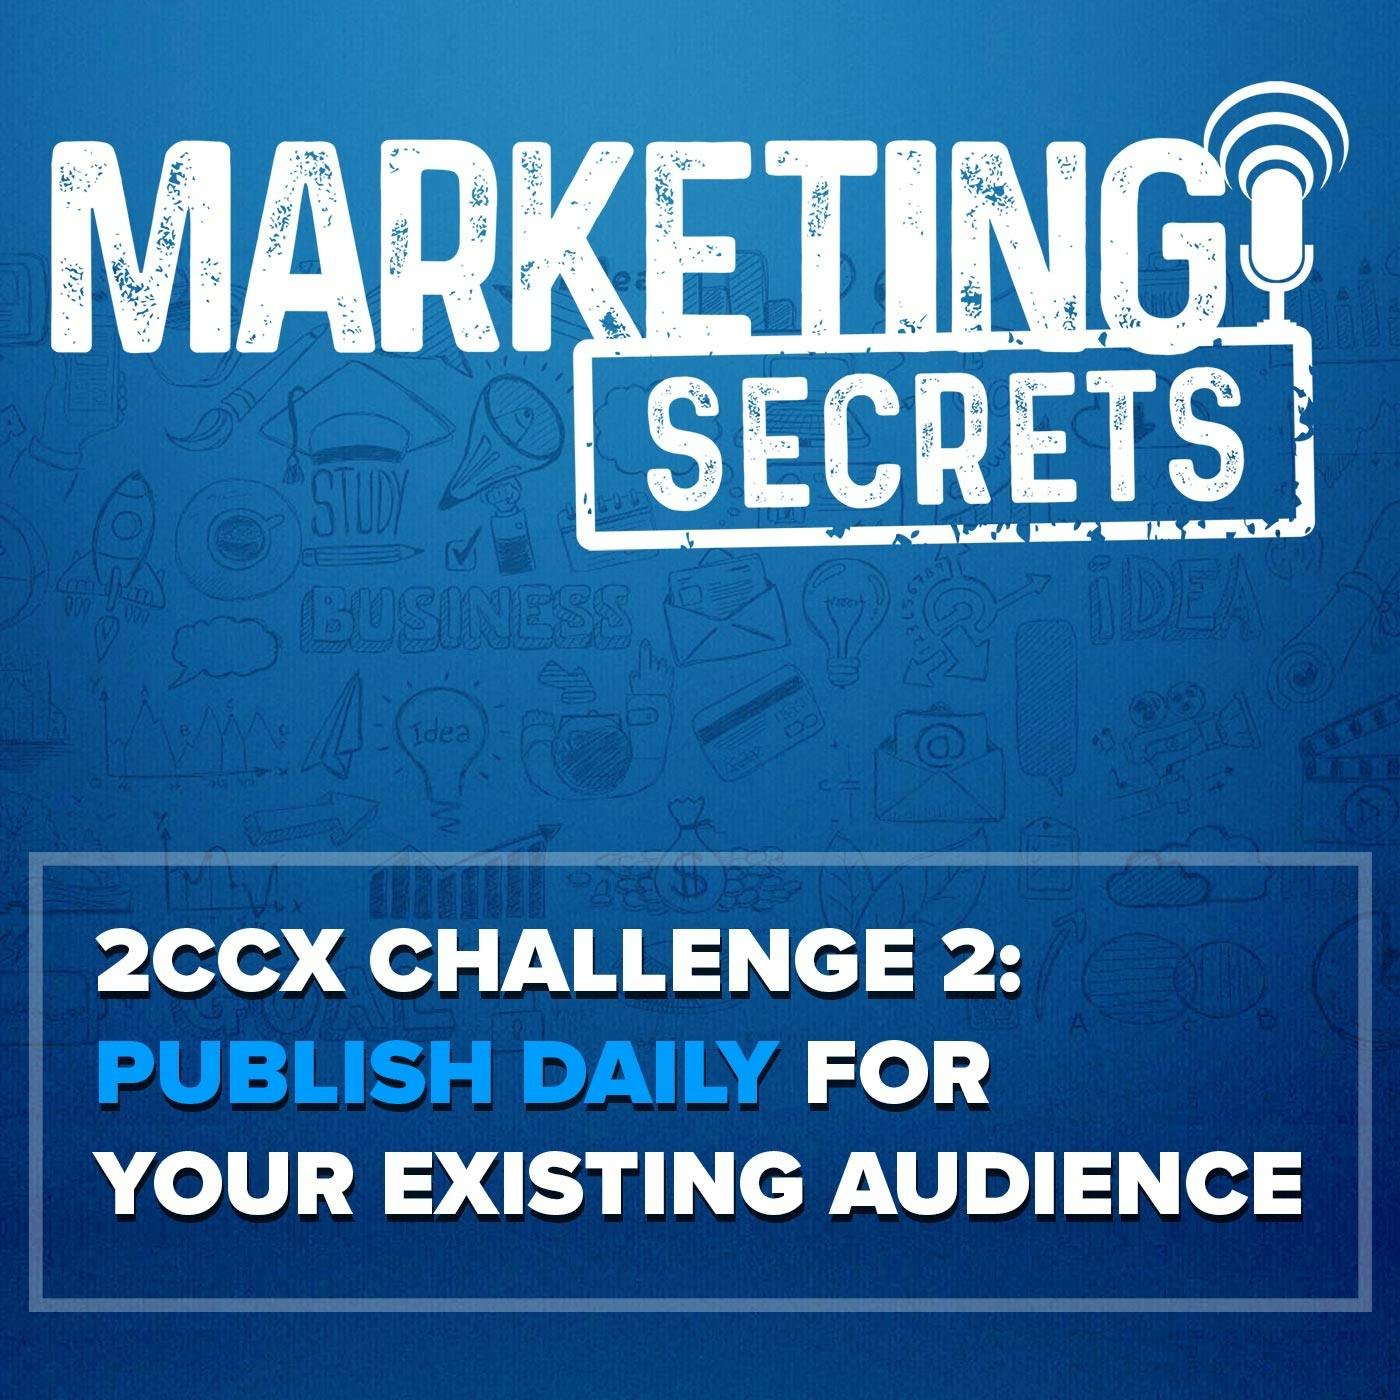 2CCX Challenge 2: Publish Daily For Your Existing Audience